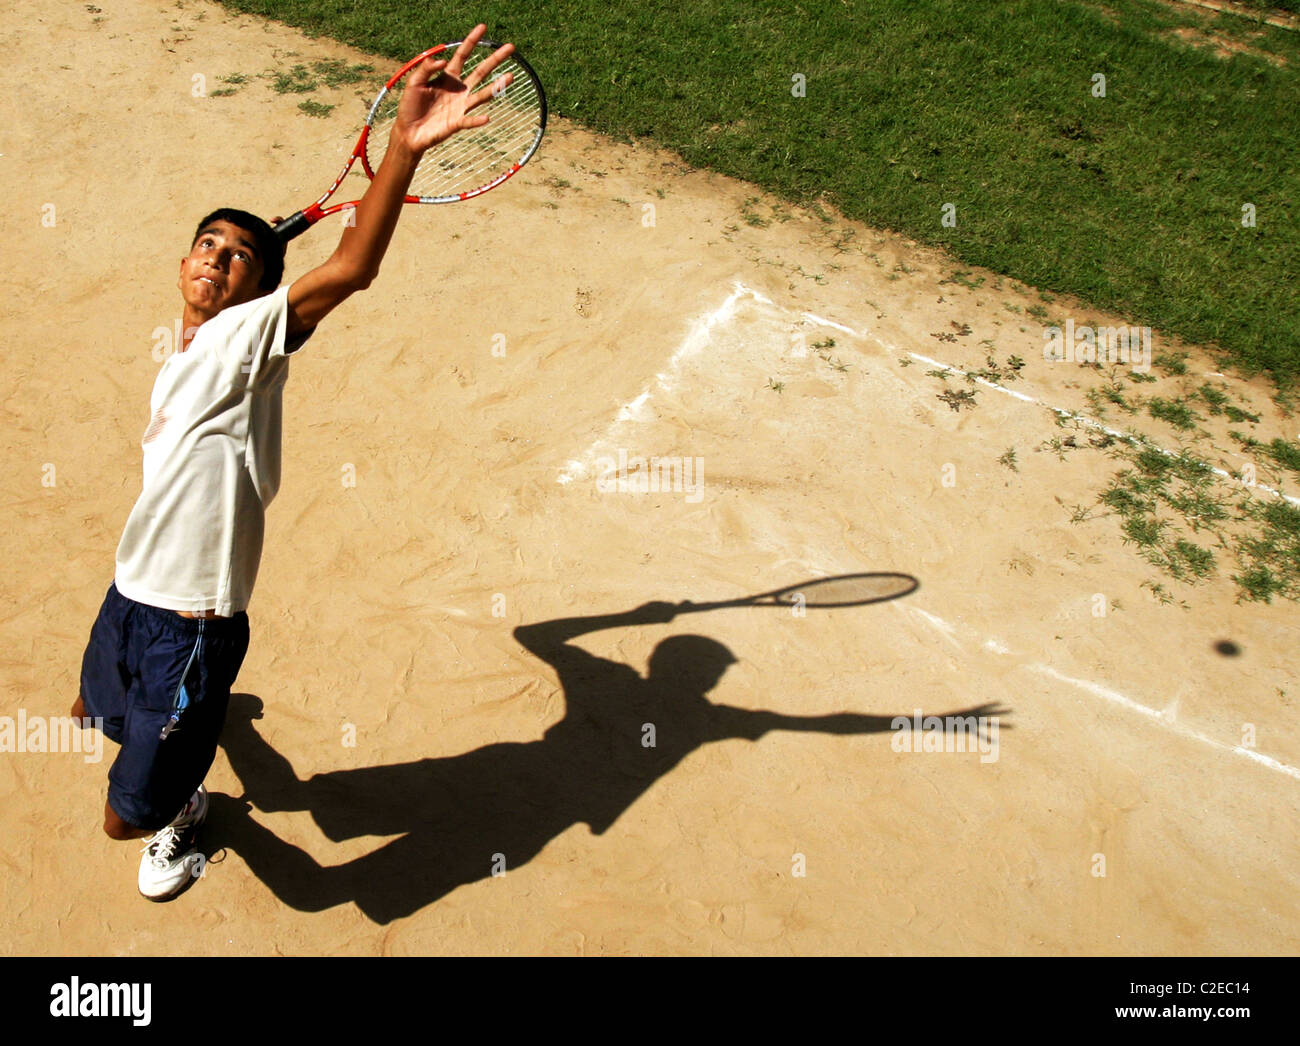 Tennis Player going for a big service on the clay court in Chandigarh, India Stock Photo